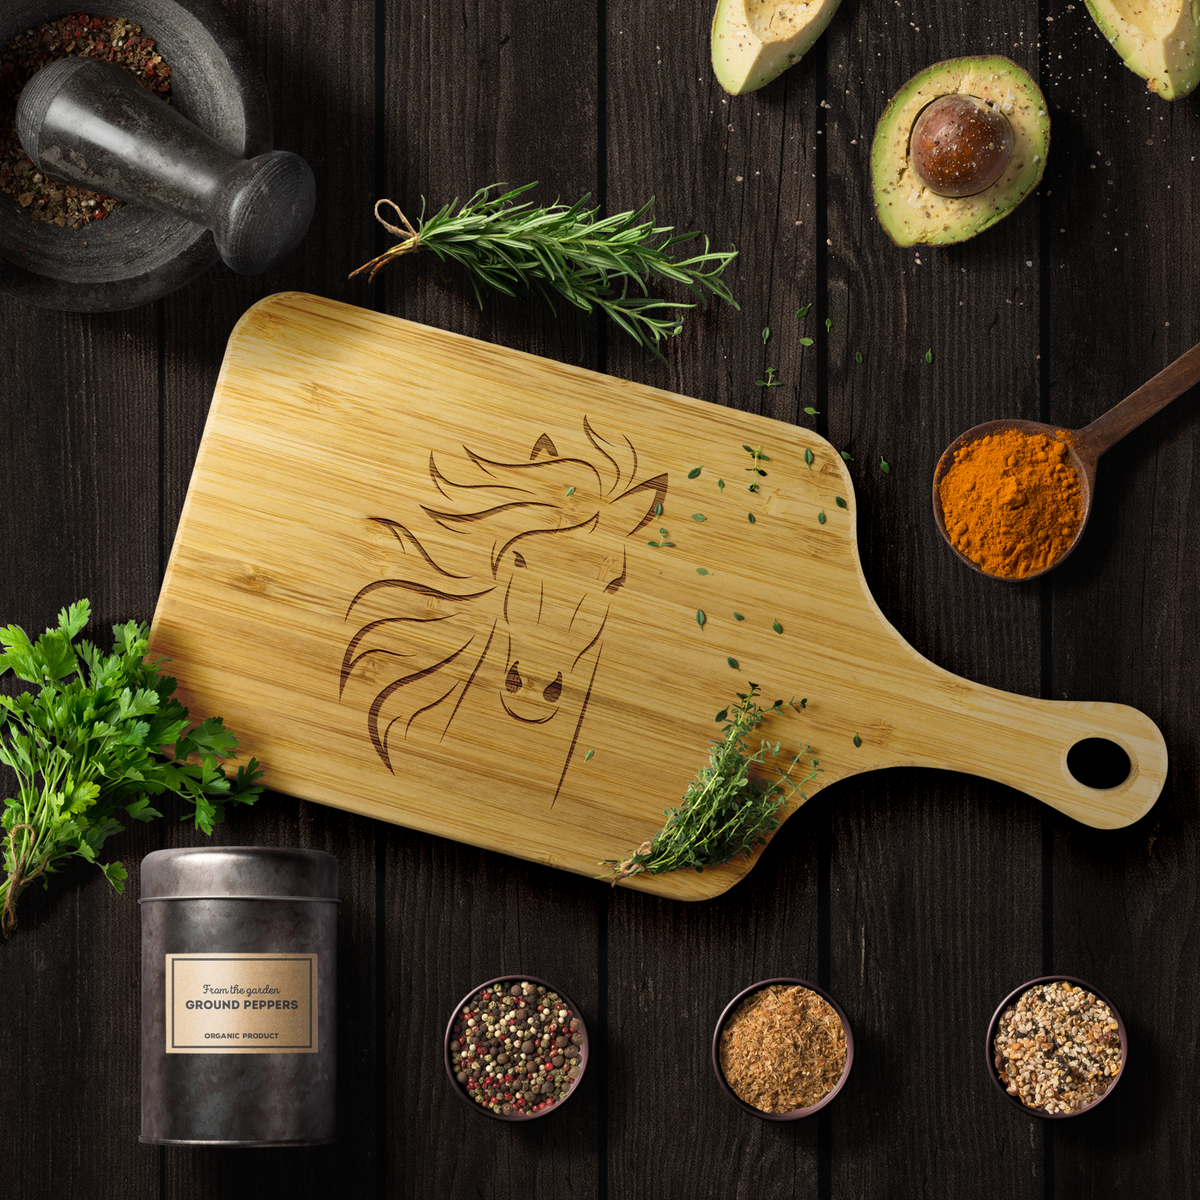 Horse - Wood Cutting Board With Handle